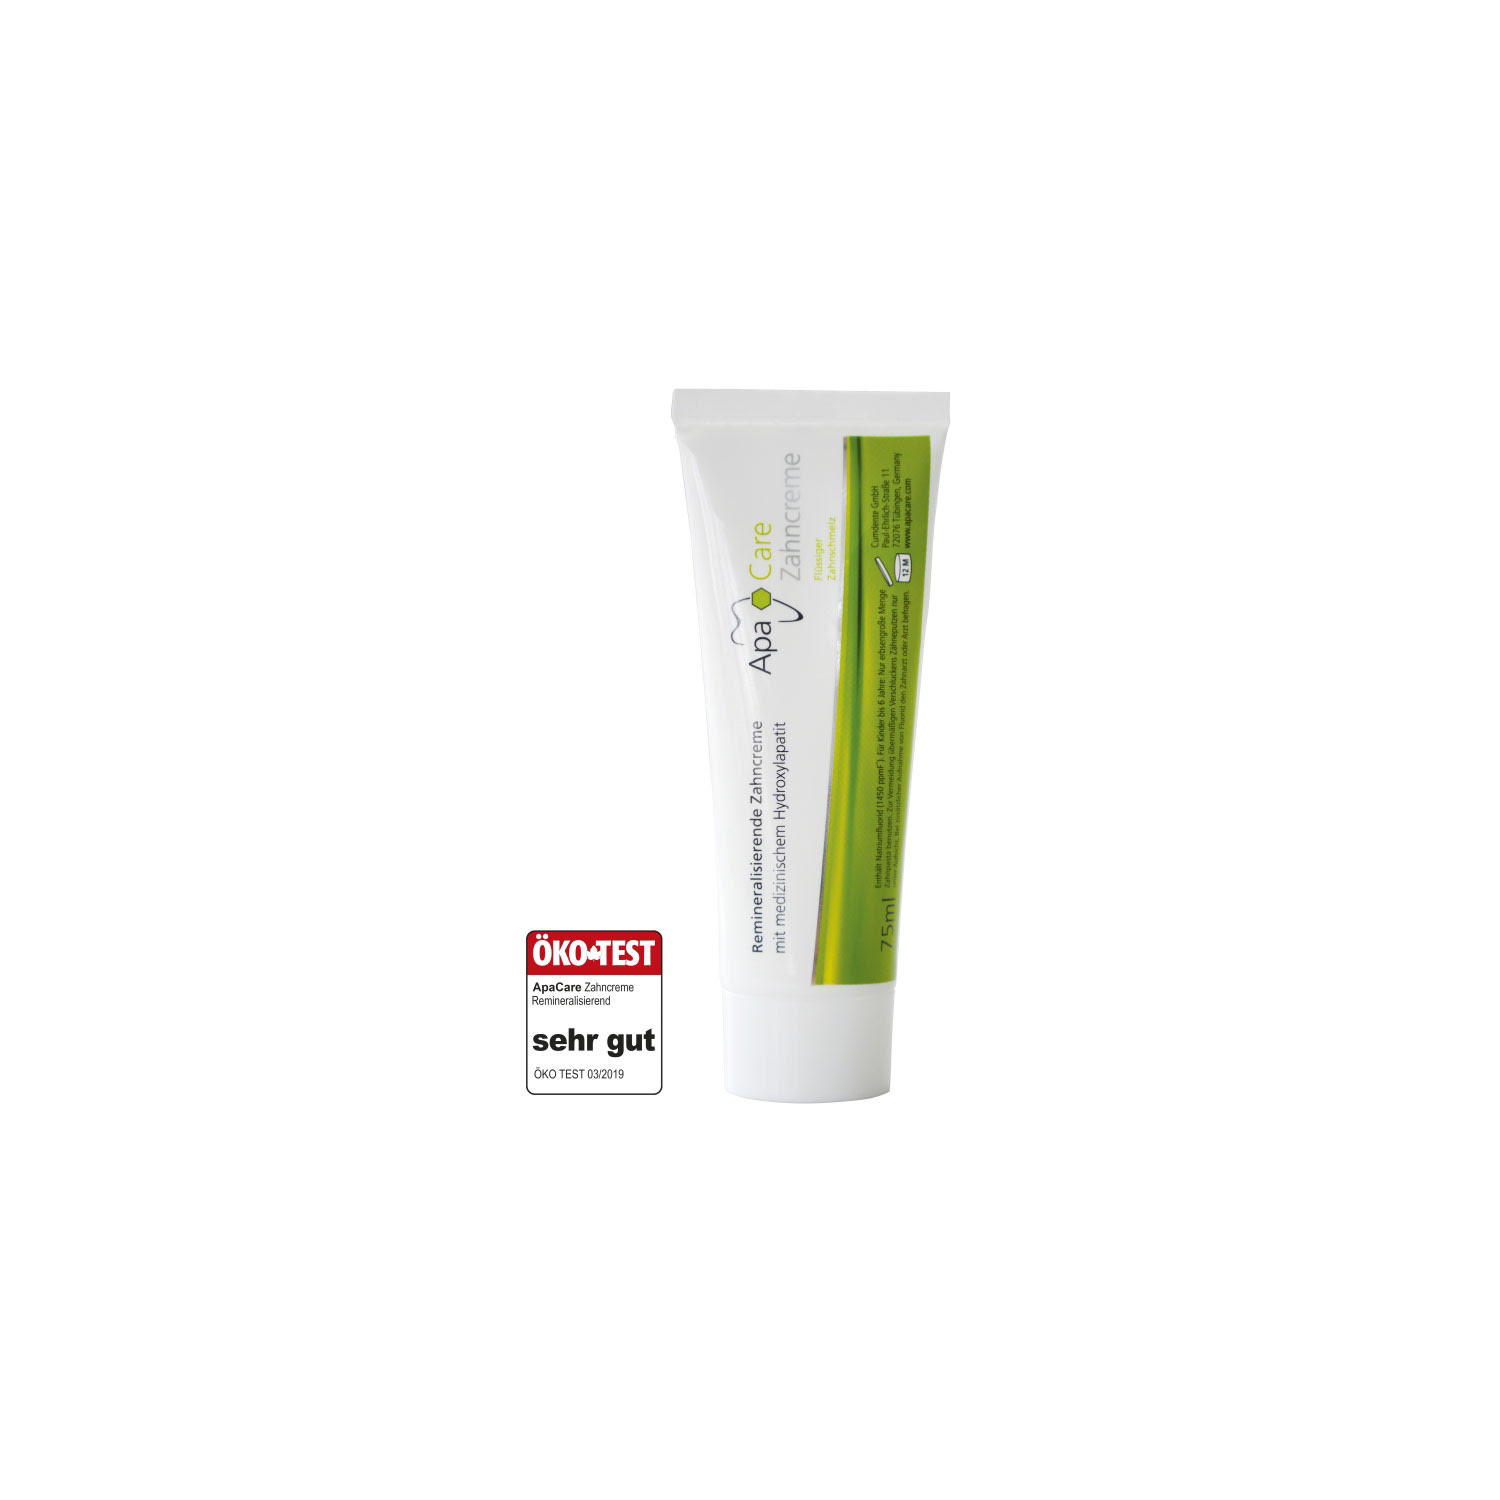 Toothpaste ApaCare ➧ online shop ♢ rated „VERY GOOD“ by ÖKOTEST